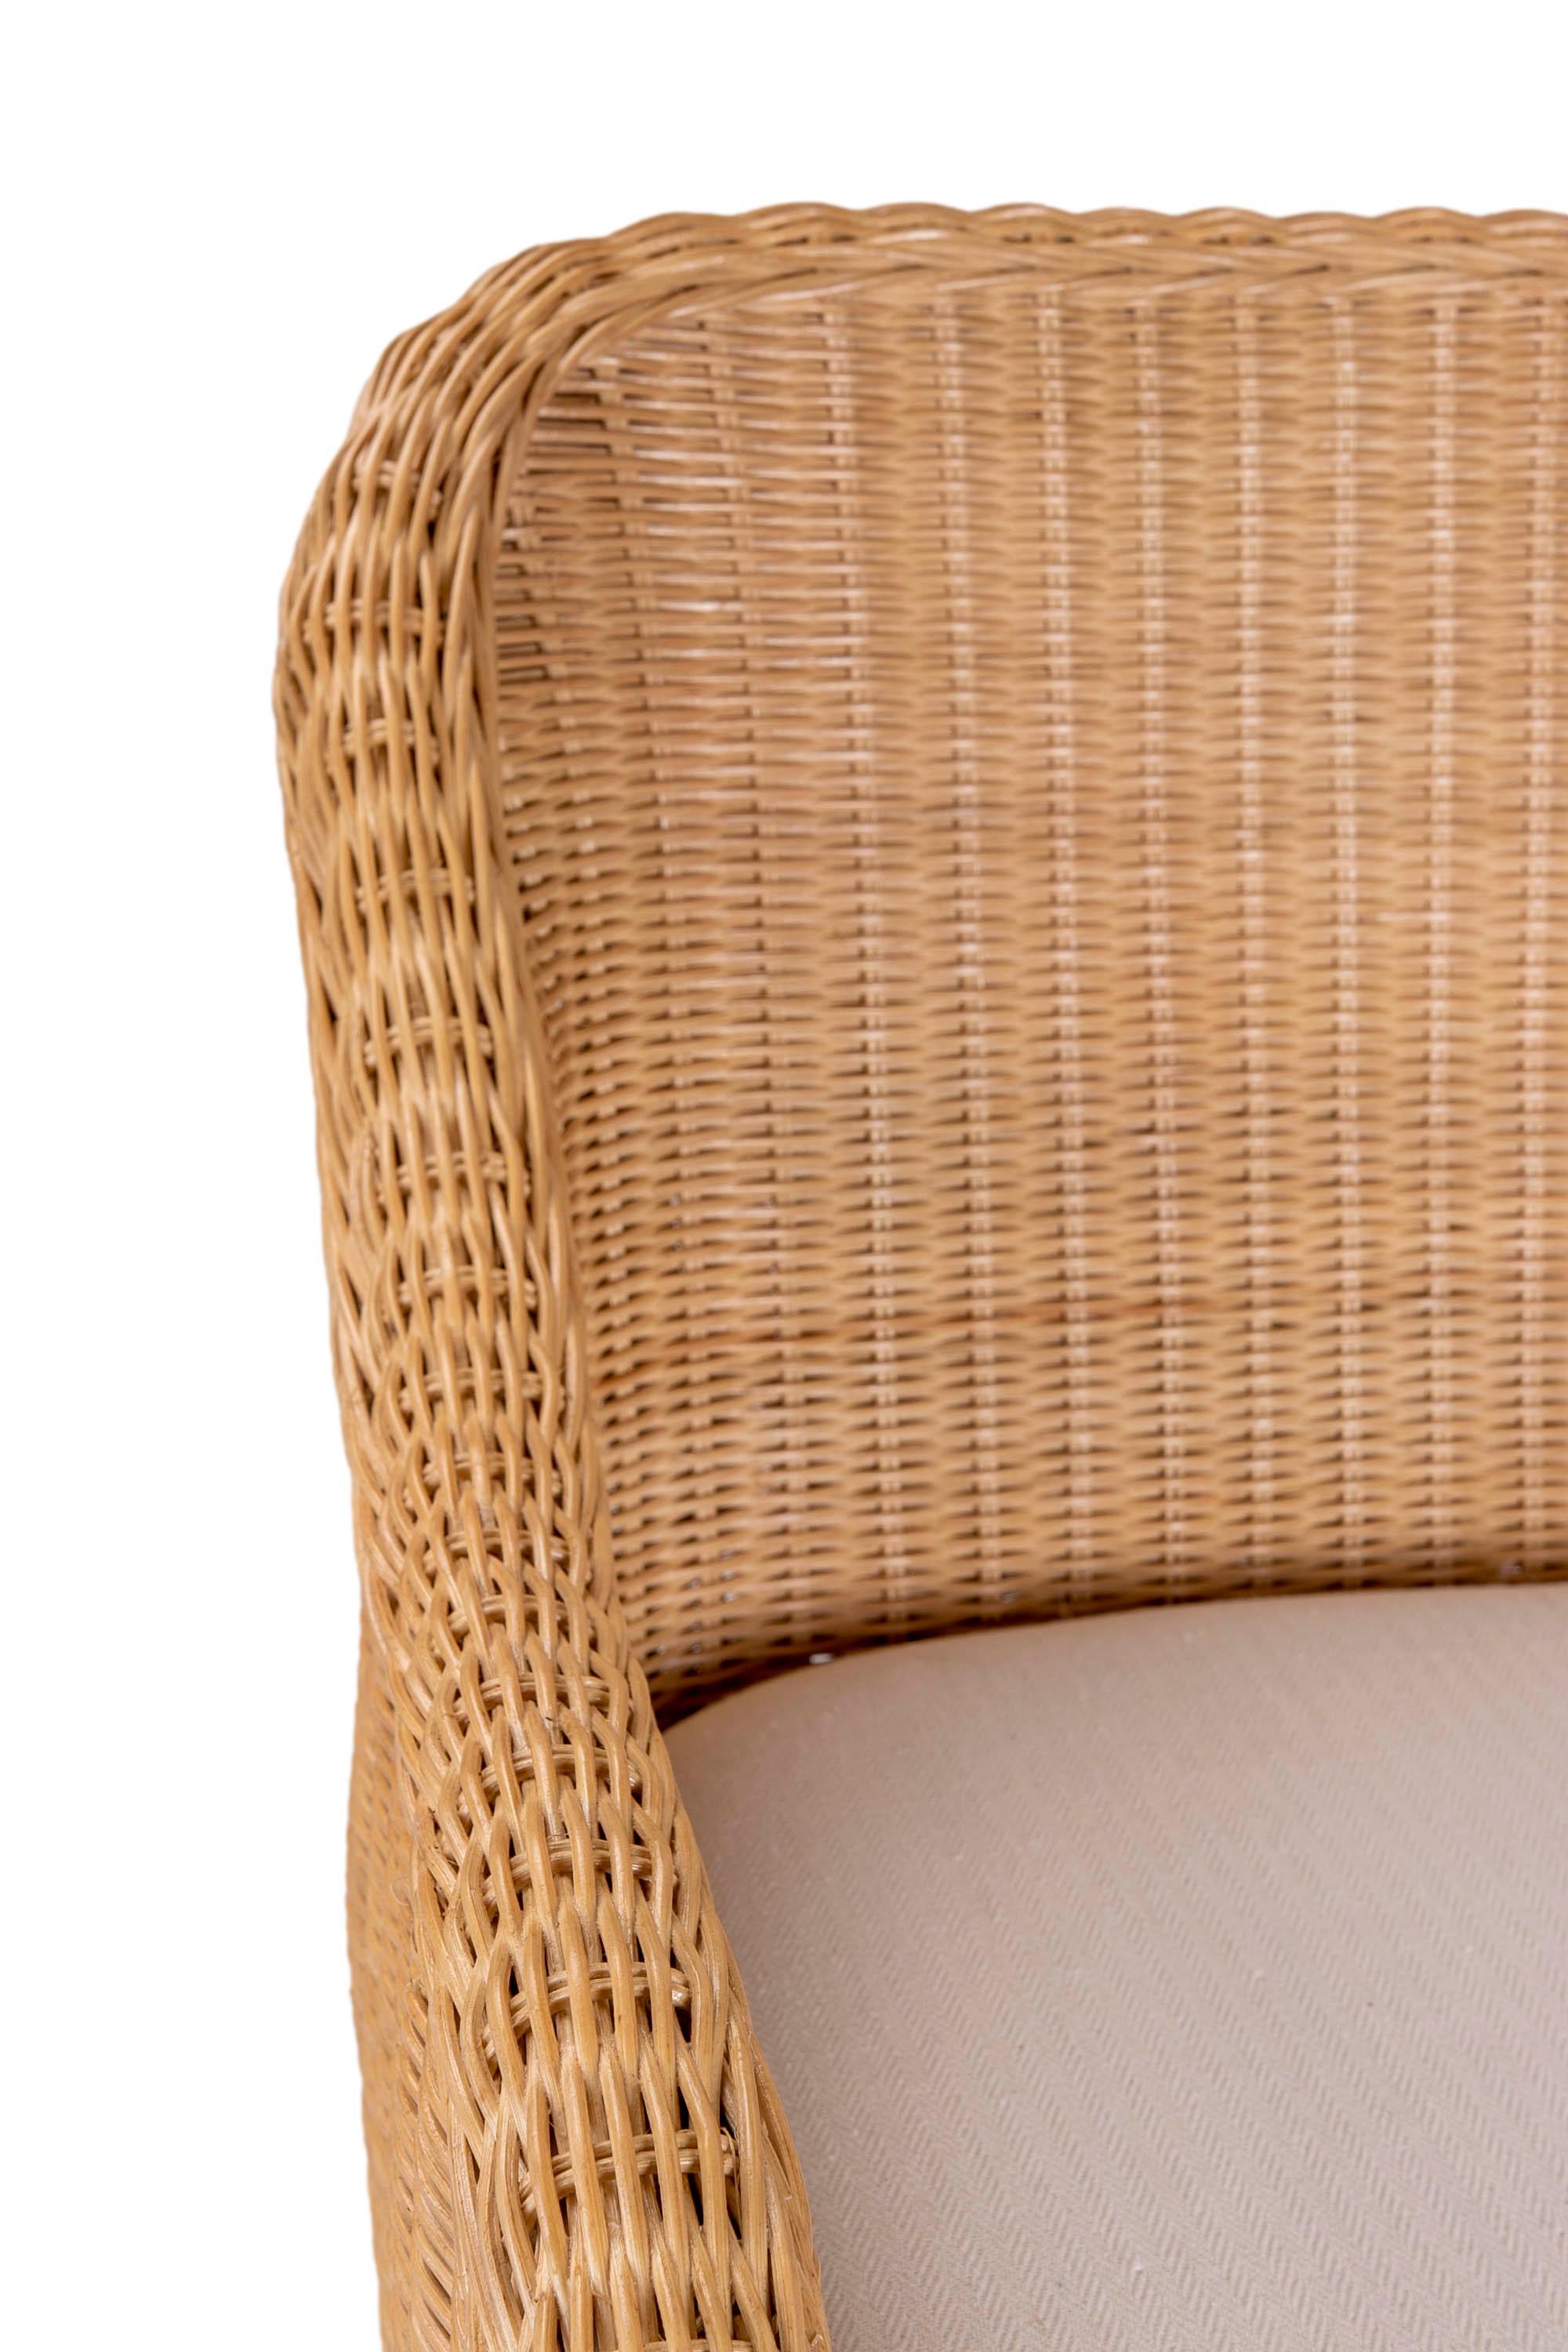 Upholstered Rattan and Wicker Bar stool with Sideways Movement 14